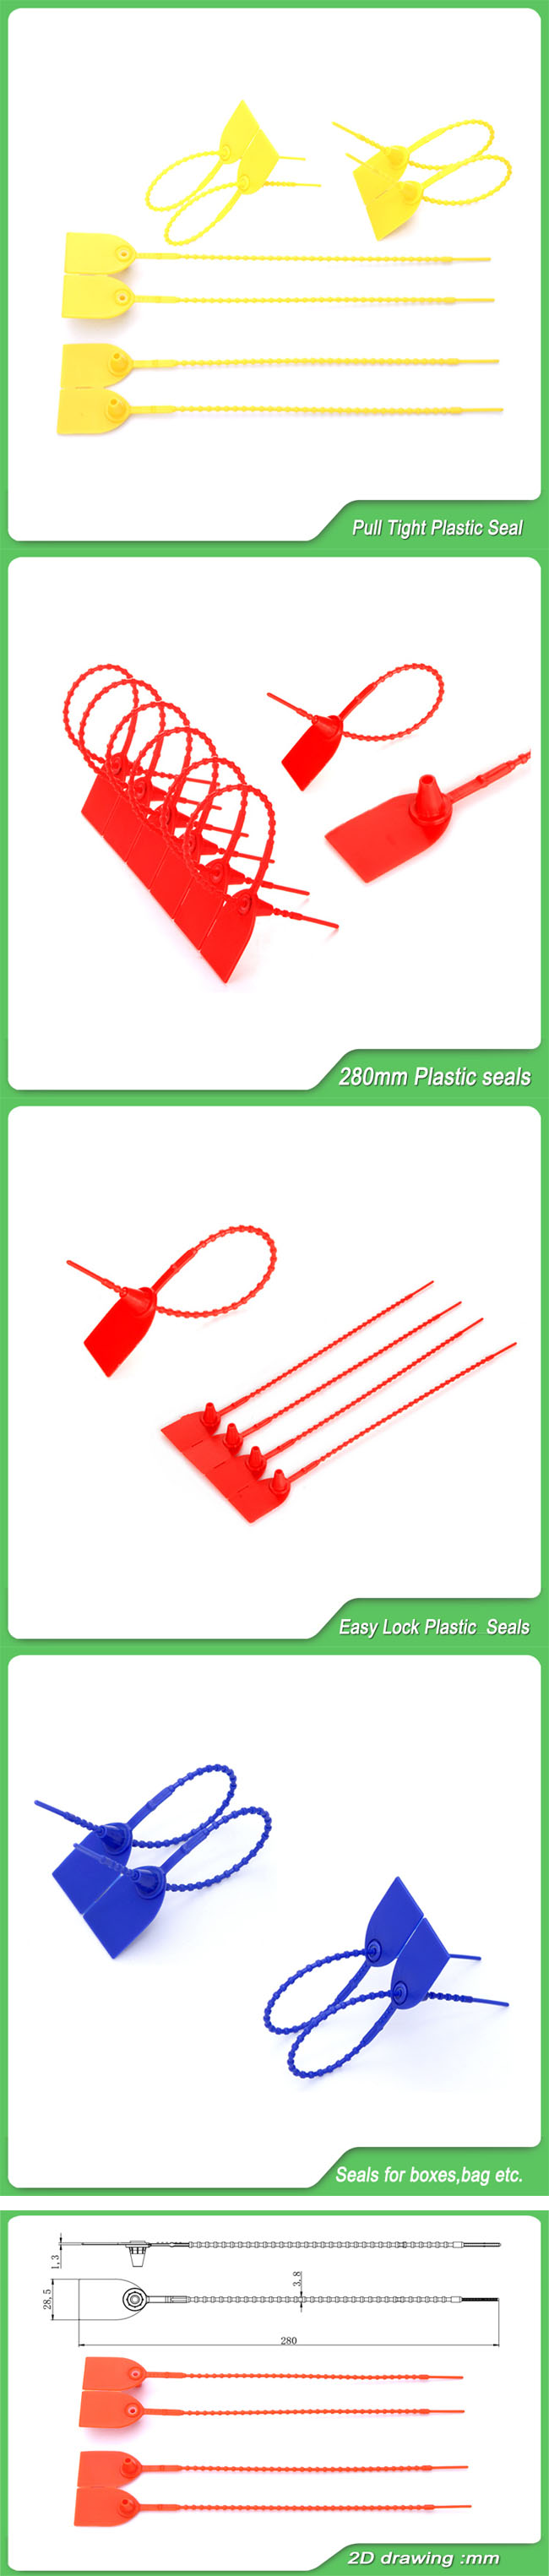 Plastic Seal for Security (JY280B)